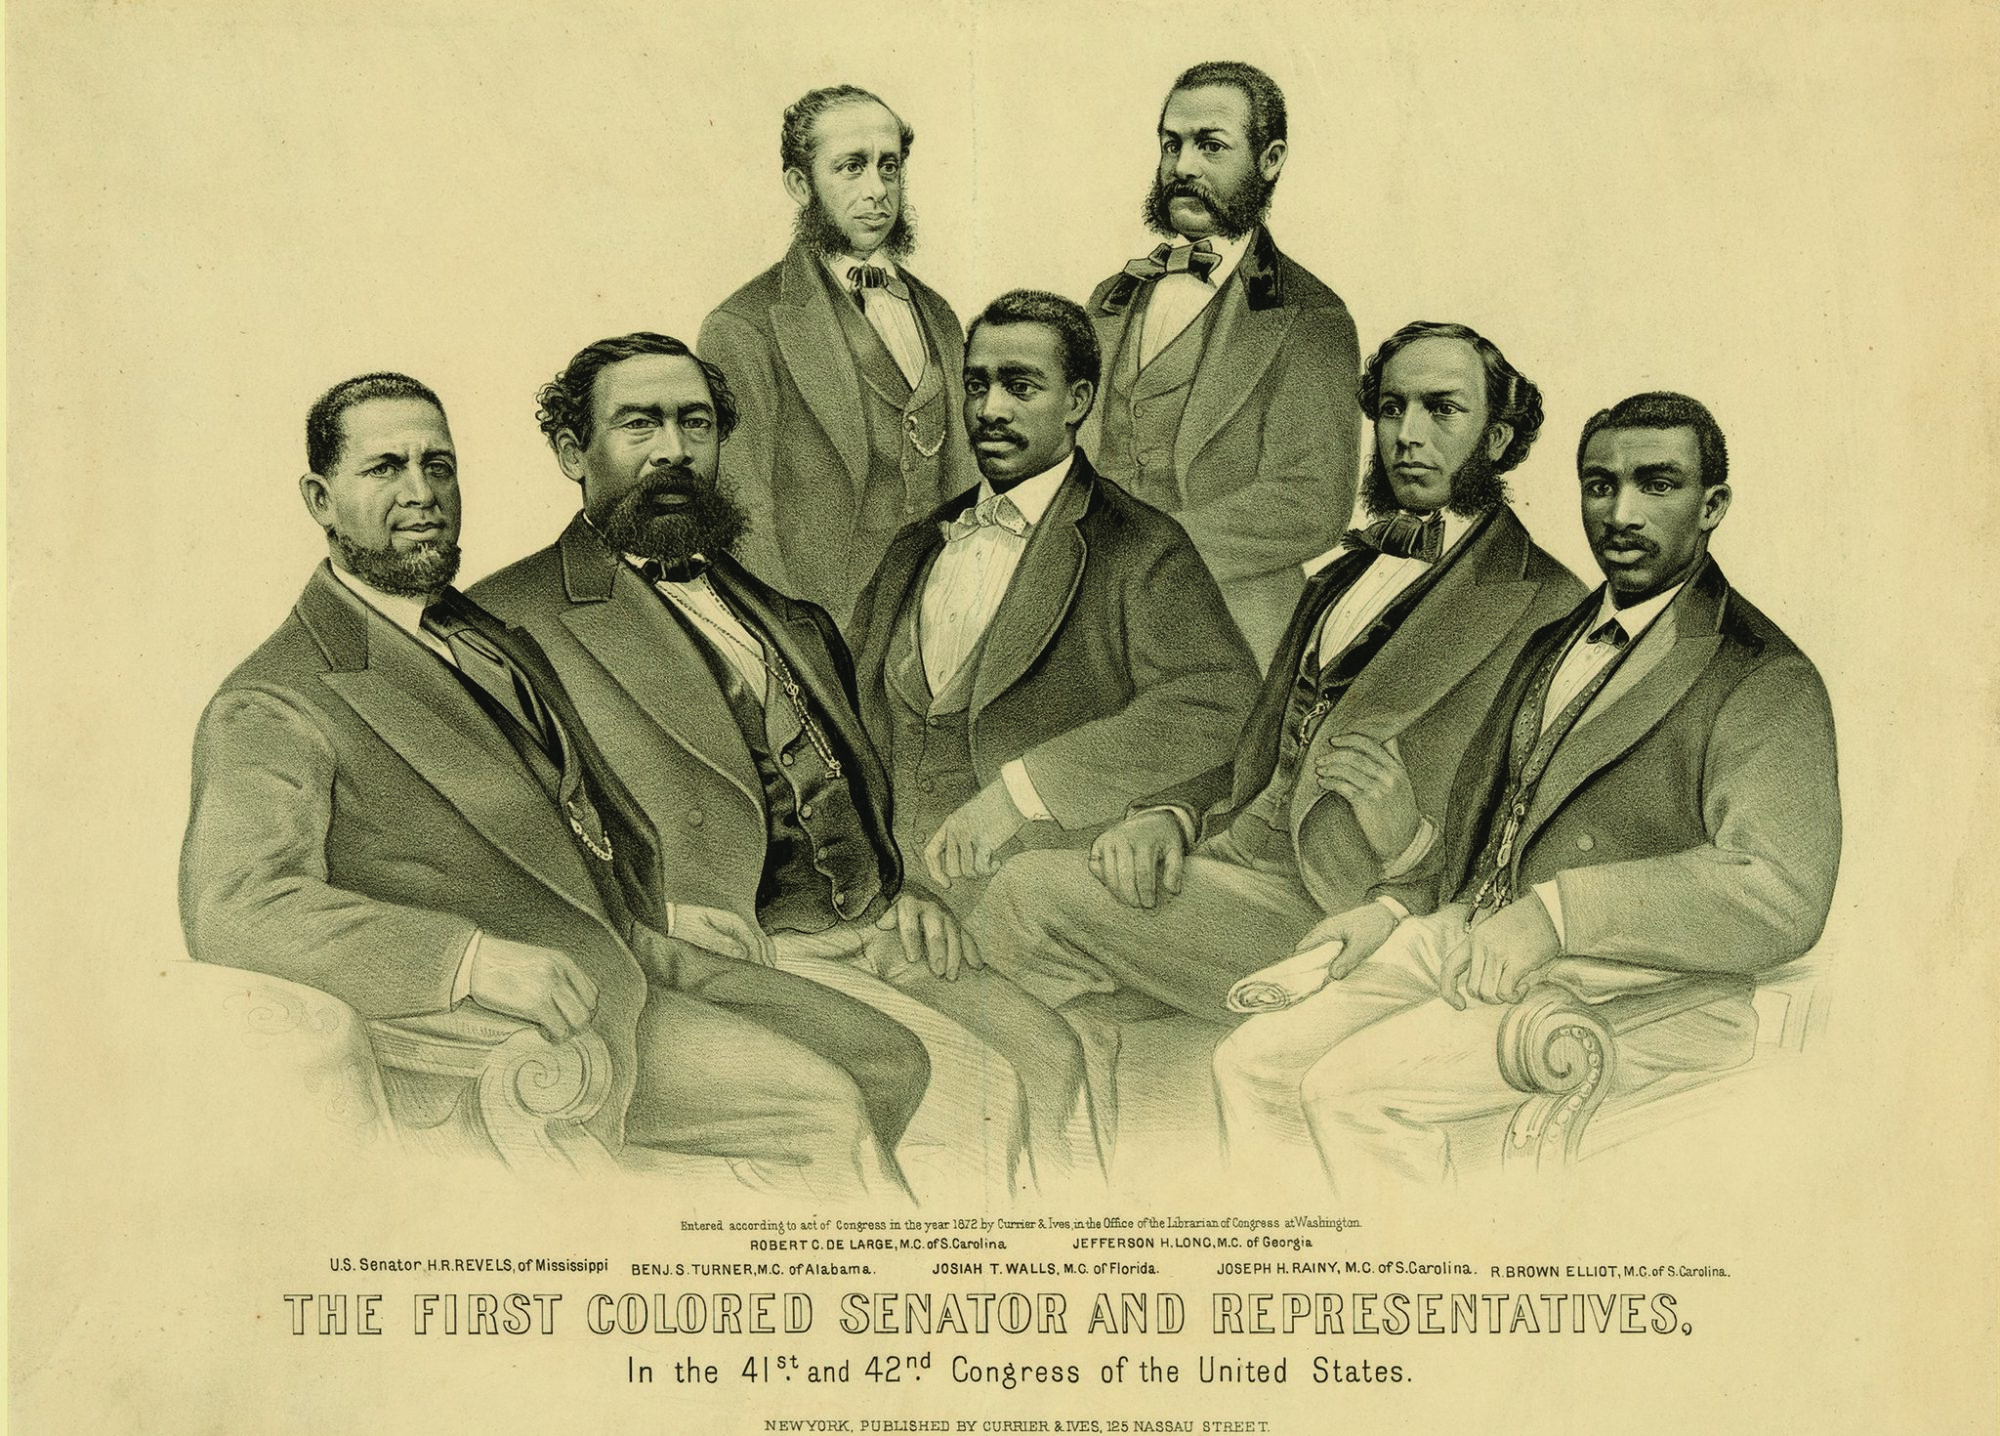 Image of the first black members of Congress